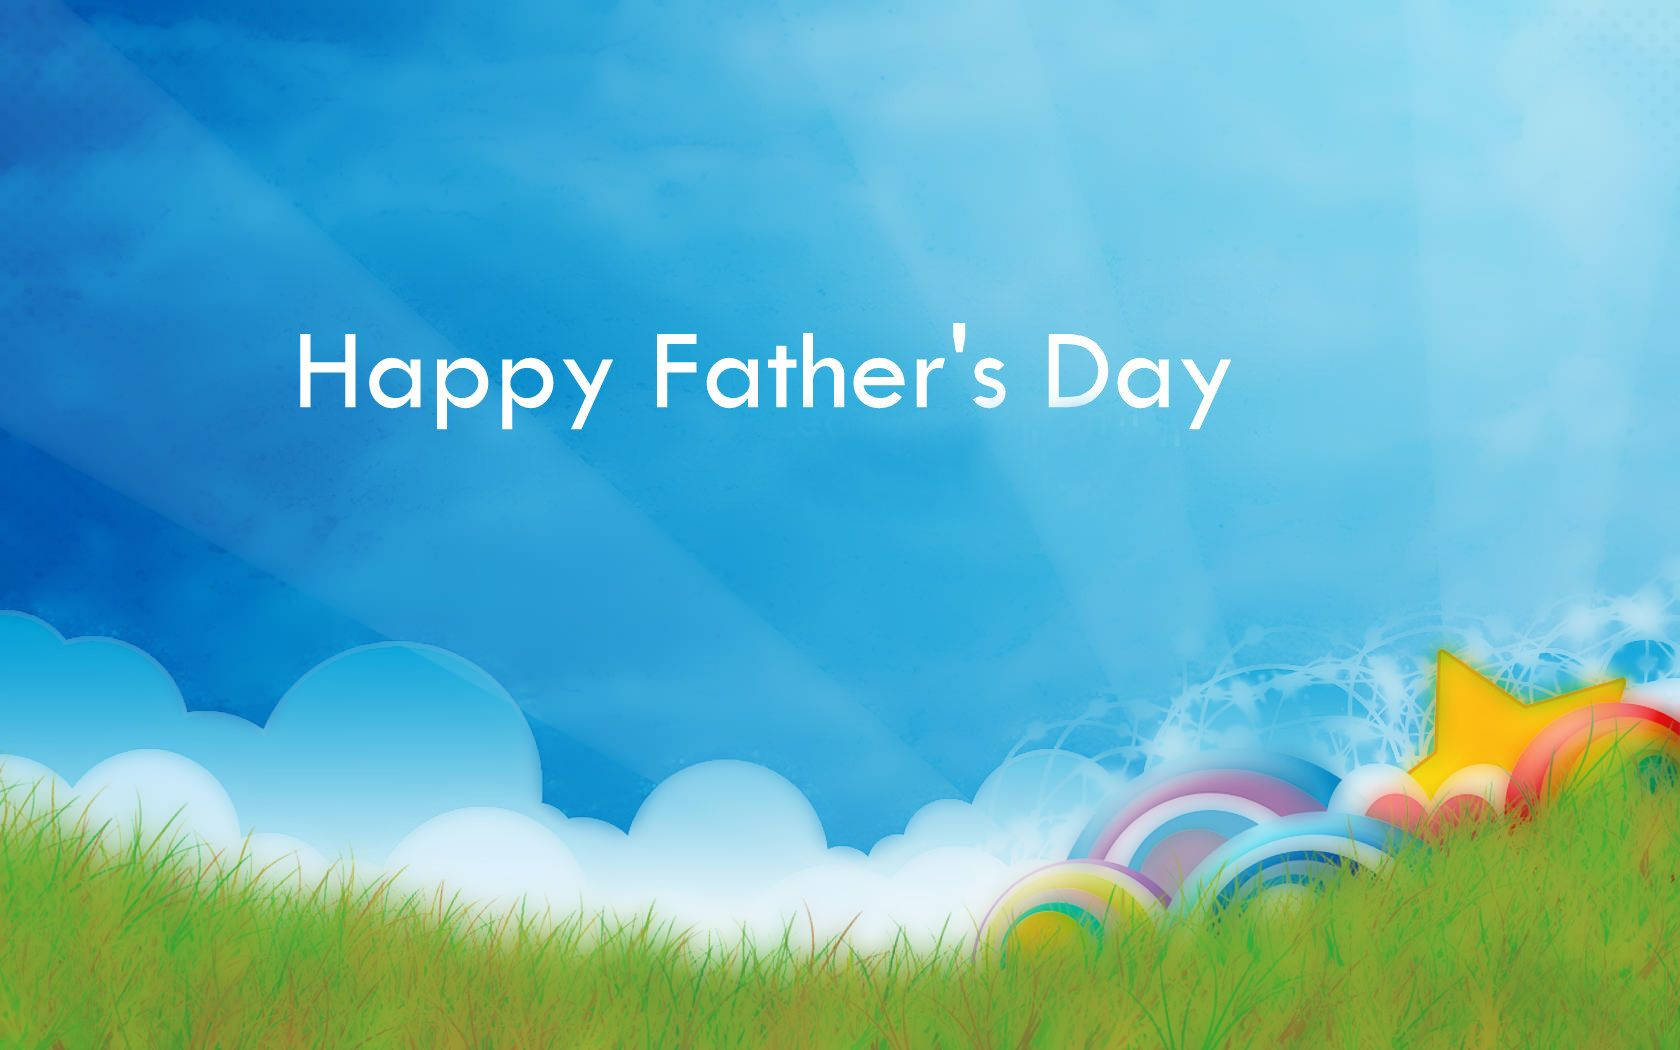 Cute Simple Greeting For Father's Day Wallpaper